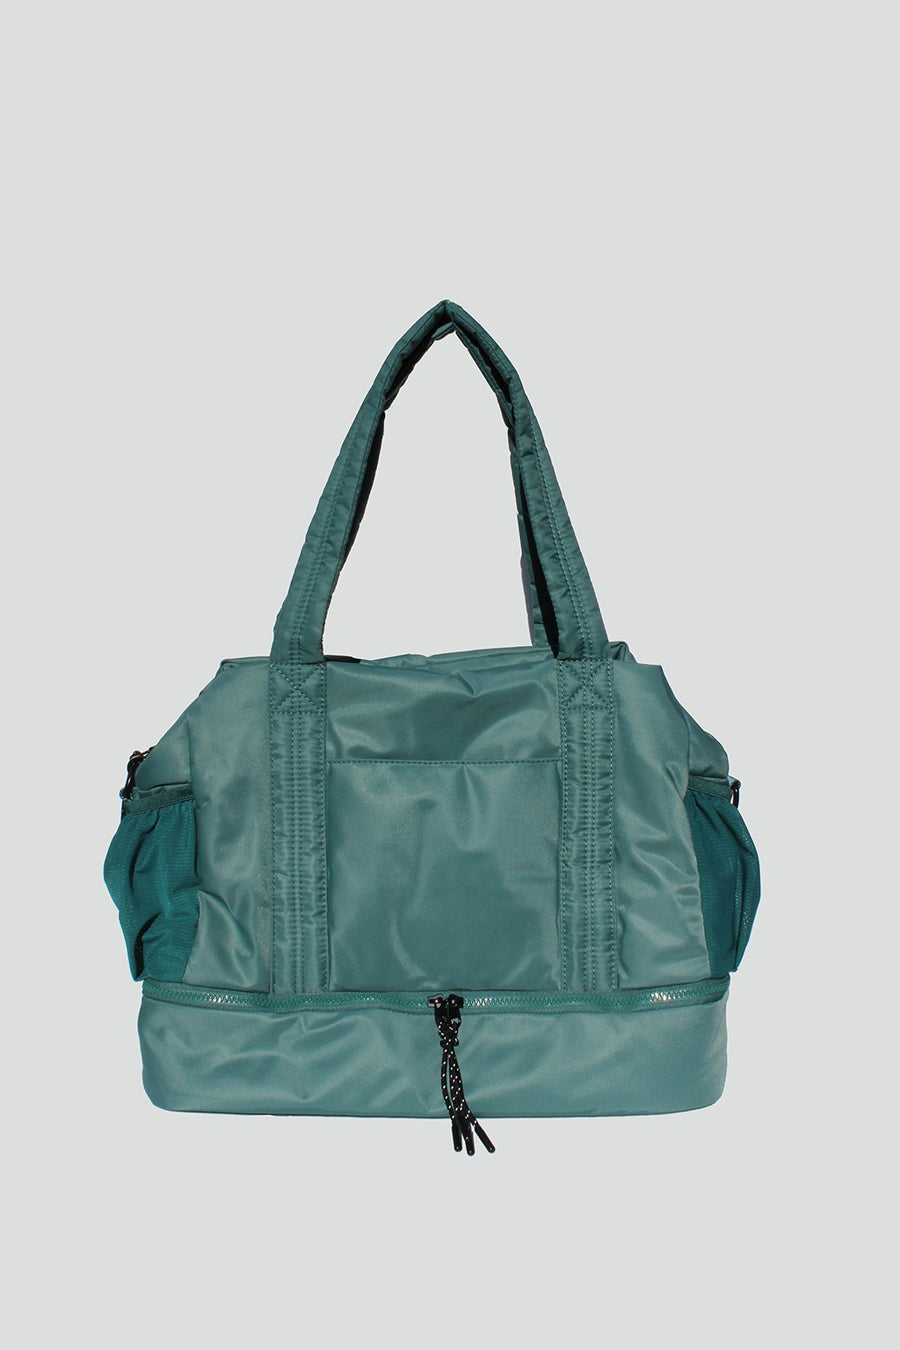 Featuring an over the shoulder/Crossbody duffle style bag with triple interior compartments and adjustable detachable straps in the color mint 